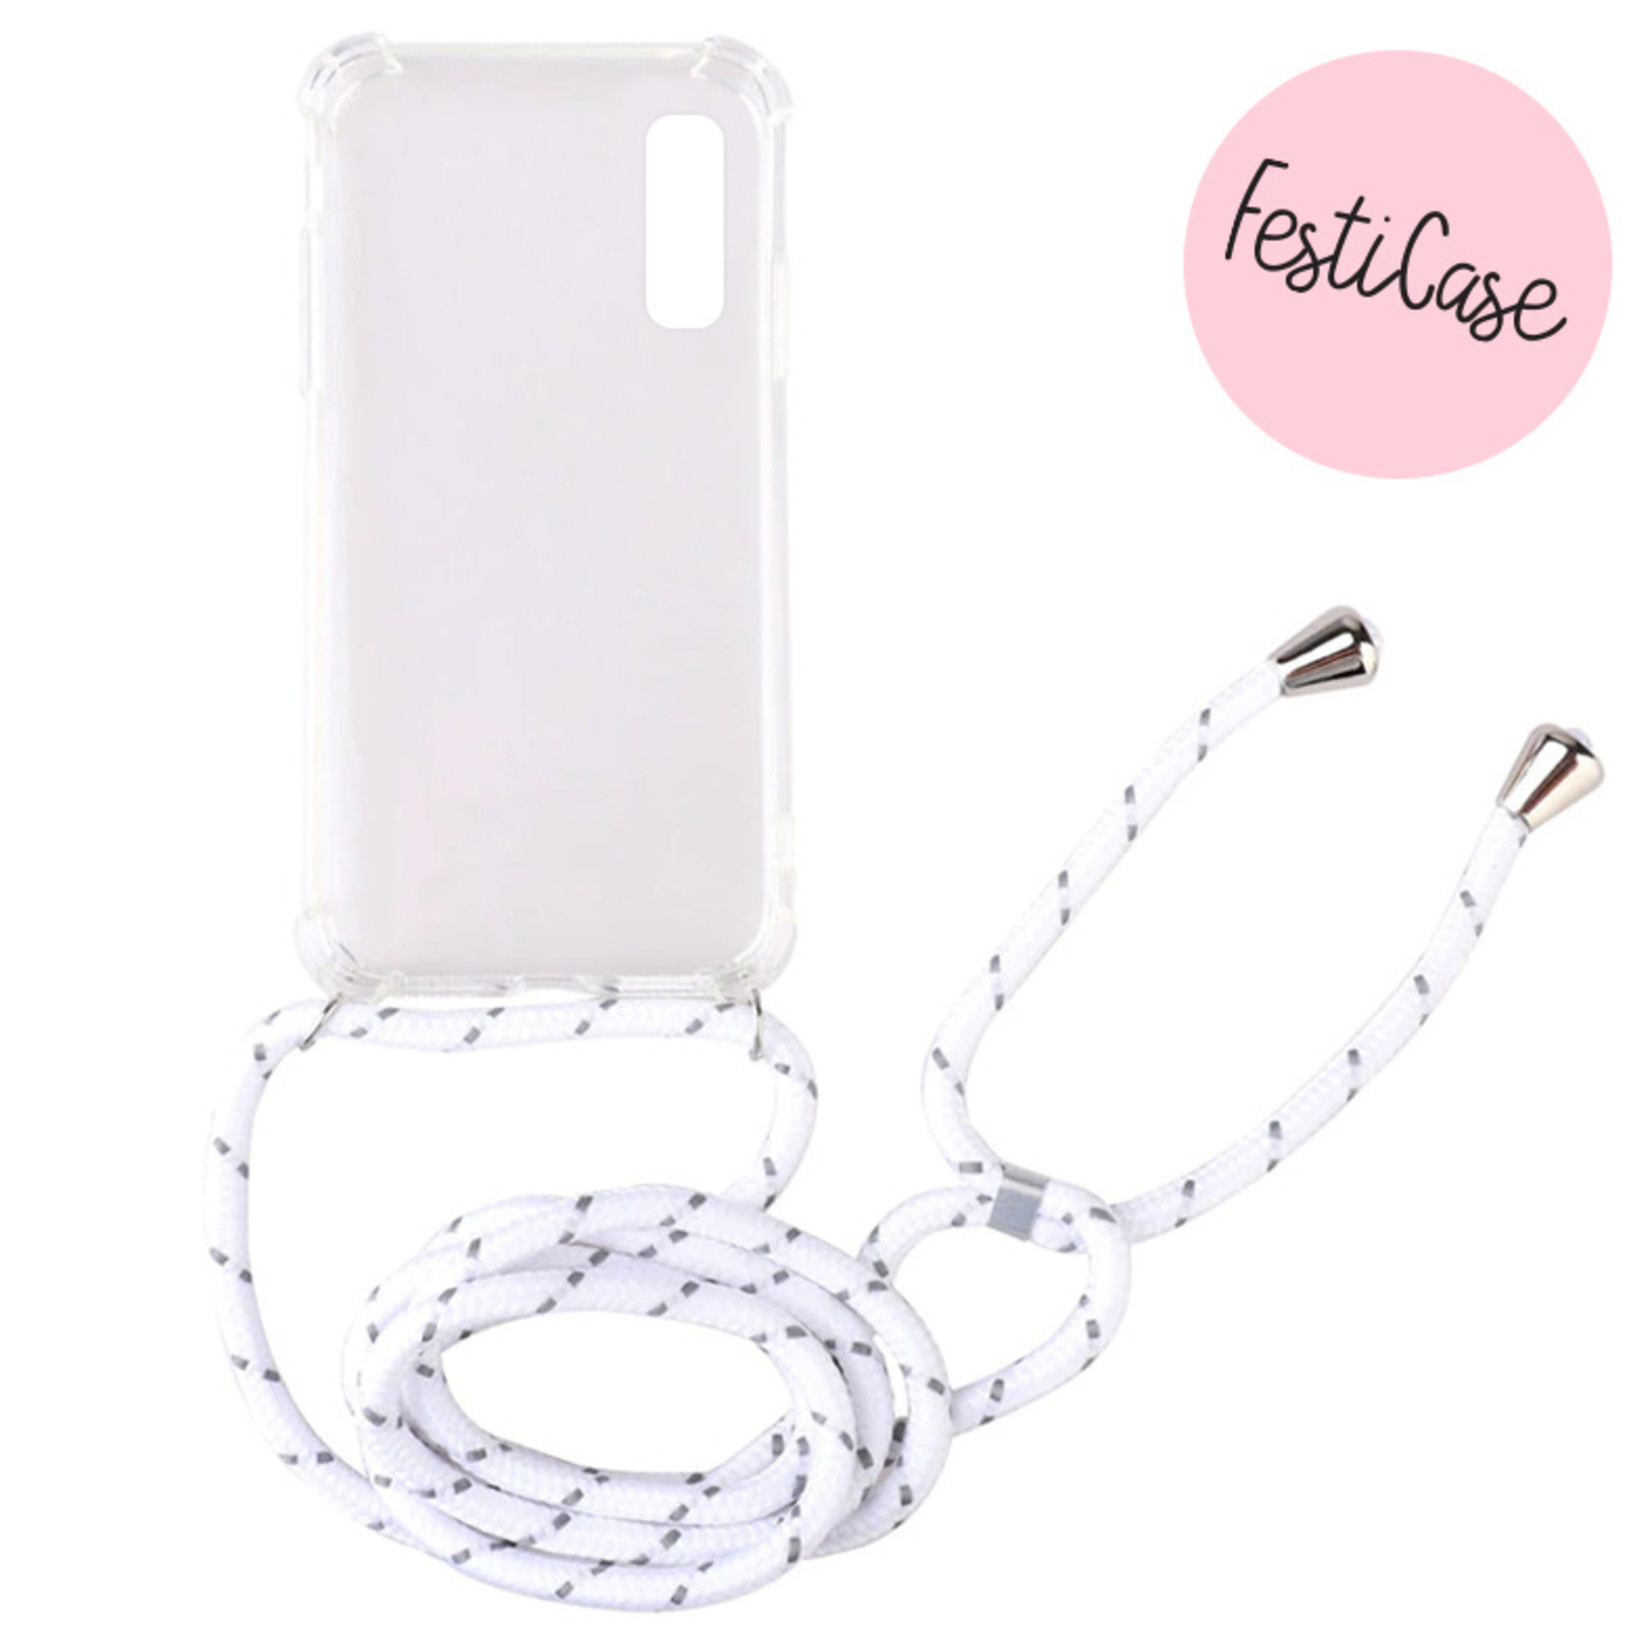 FOONCASE Samsung Galaxy A50 phone case with cord | Festival, - FOONCASE Your fave case